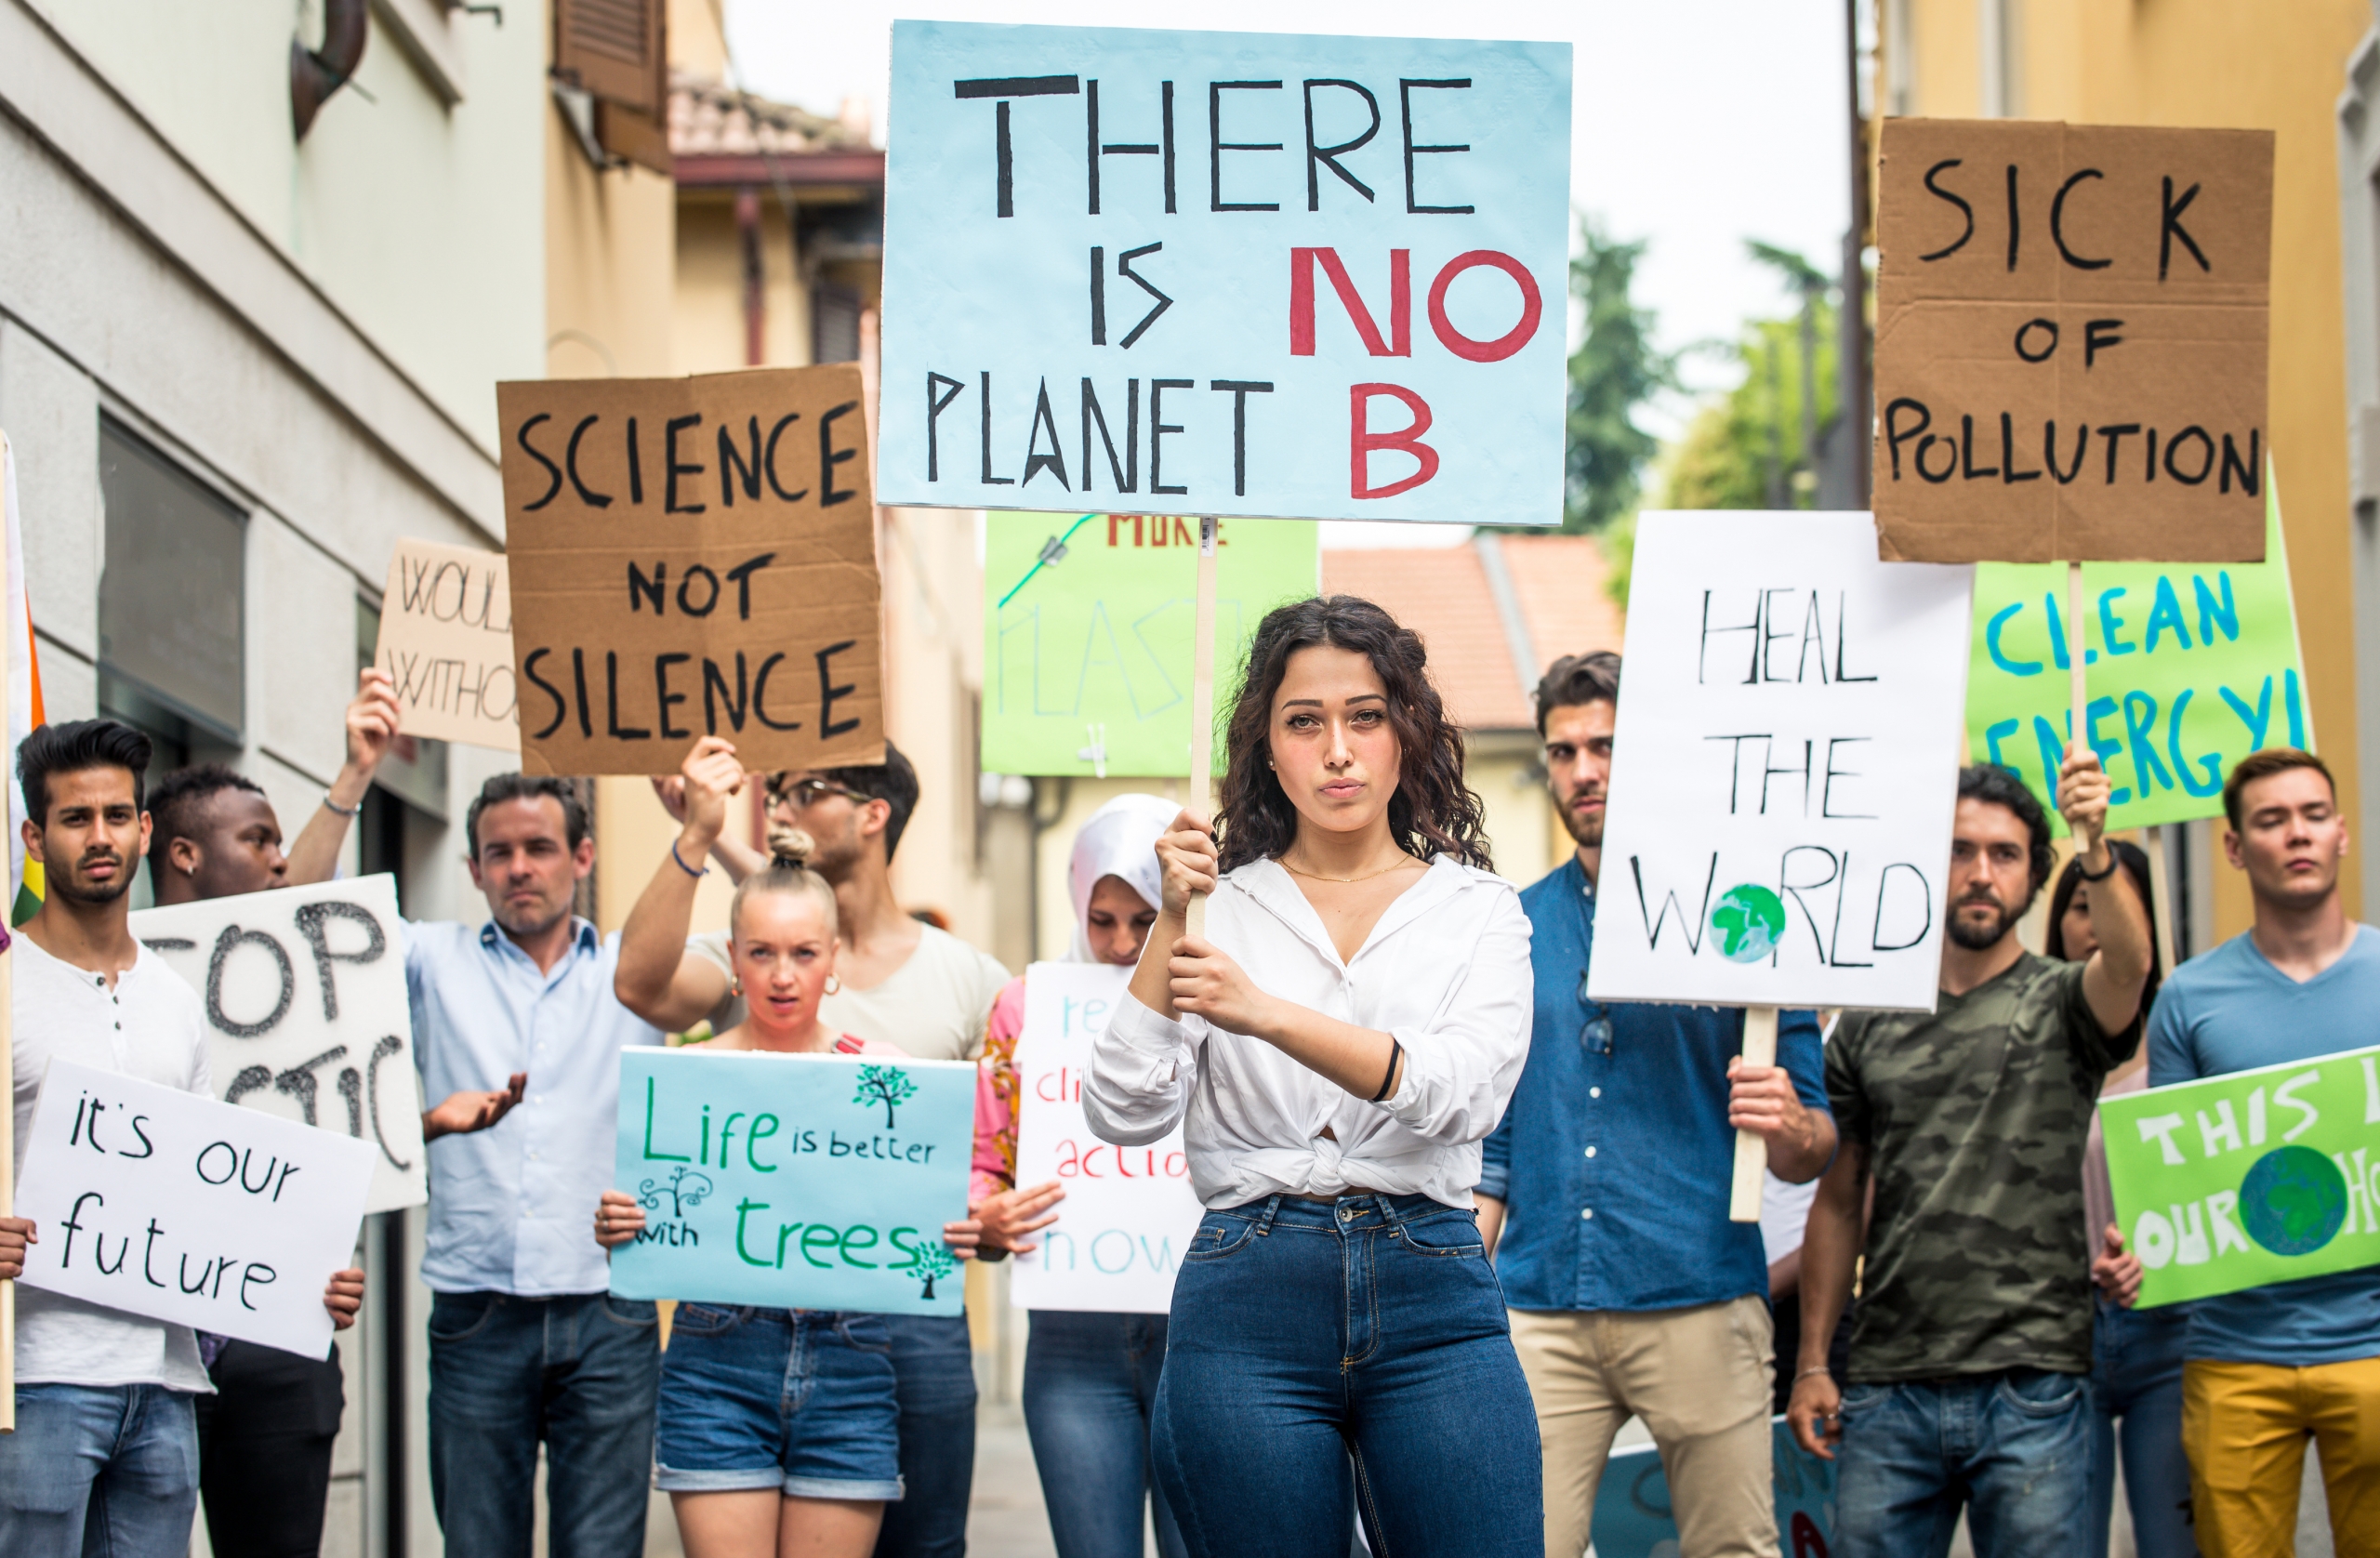 Public demonstration on the street against global warming and pollution. Group of multiethnic people making protest about climate change and plastic problems in the oceans